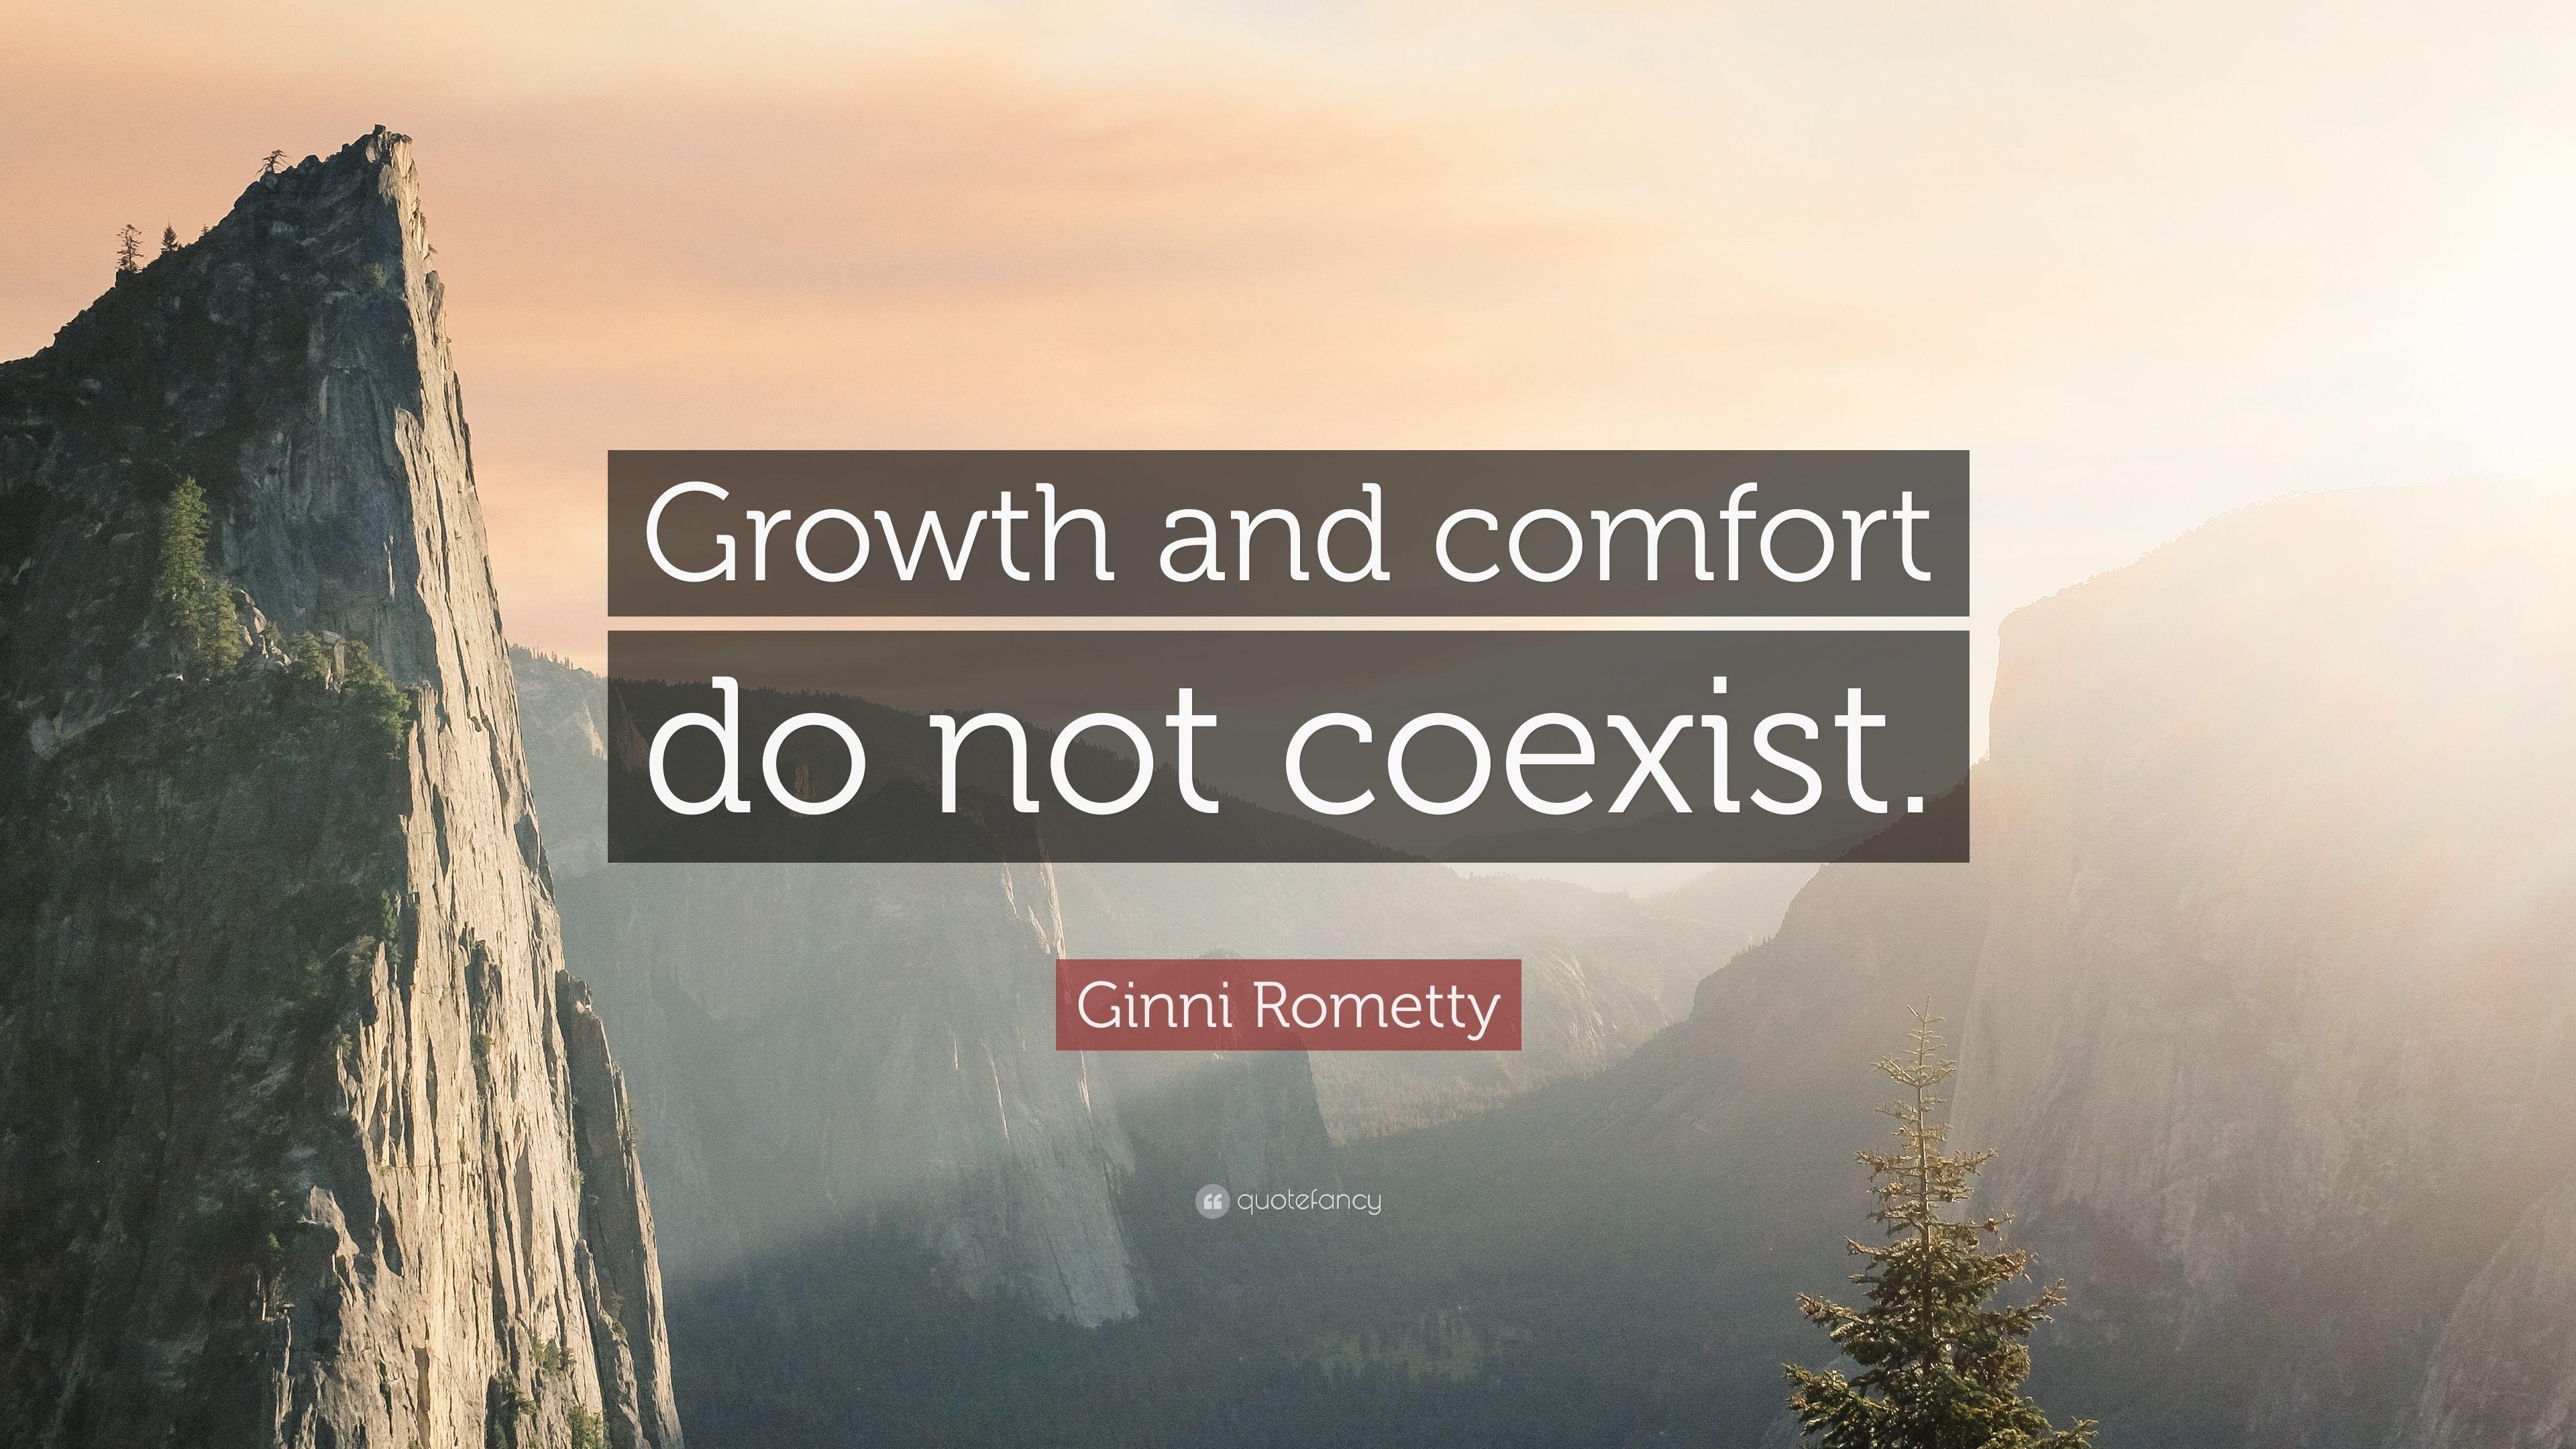 Ginni Rometty Quote: “Growth and comfort do not coexist.” 12